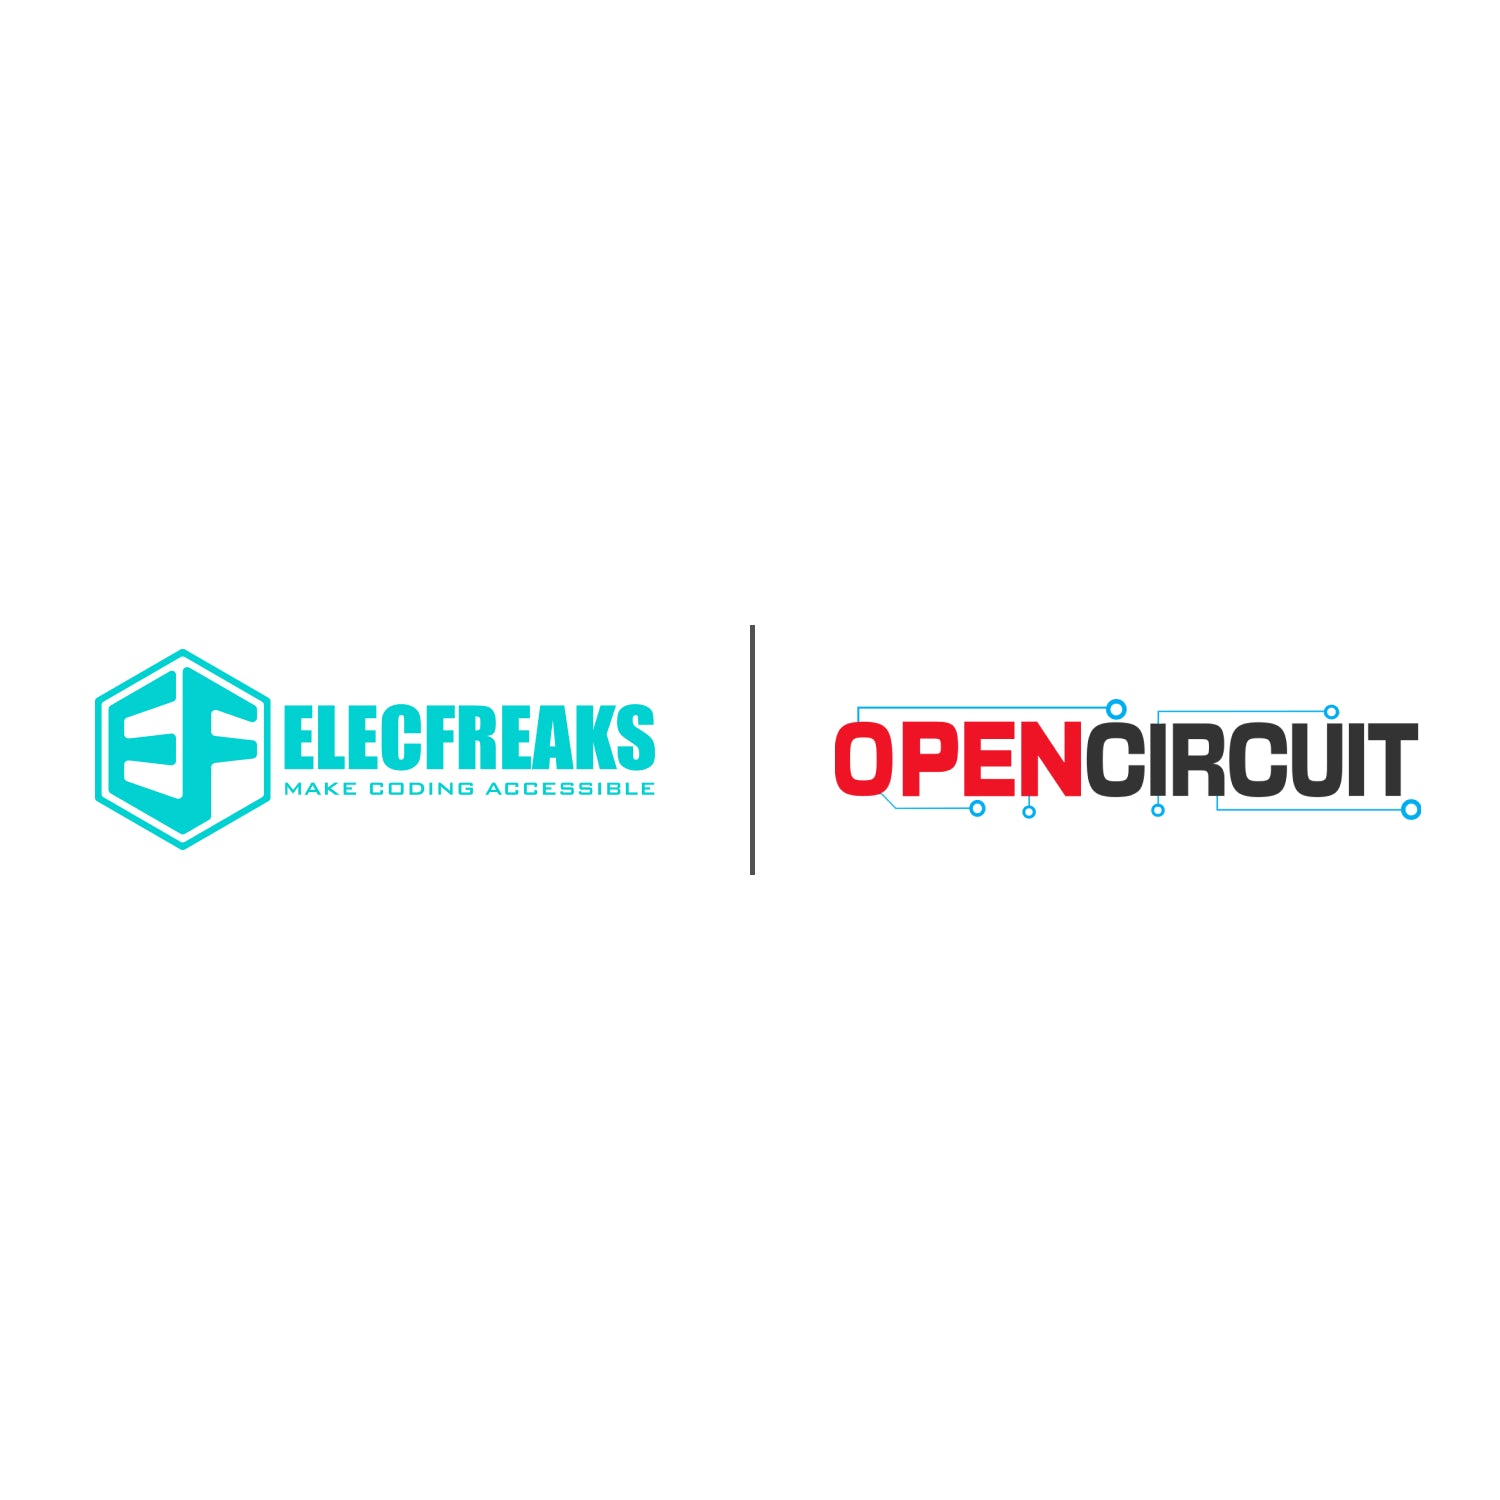 Our New Distributor——Opencircuit